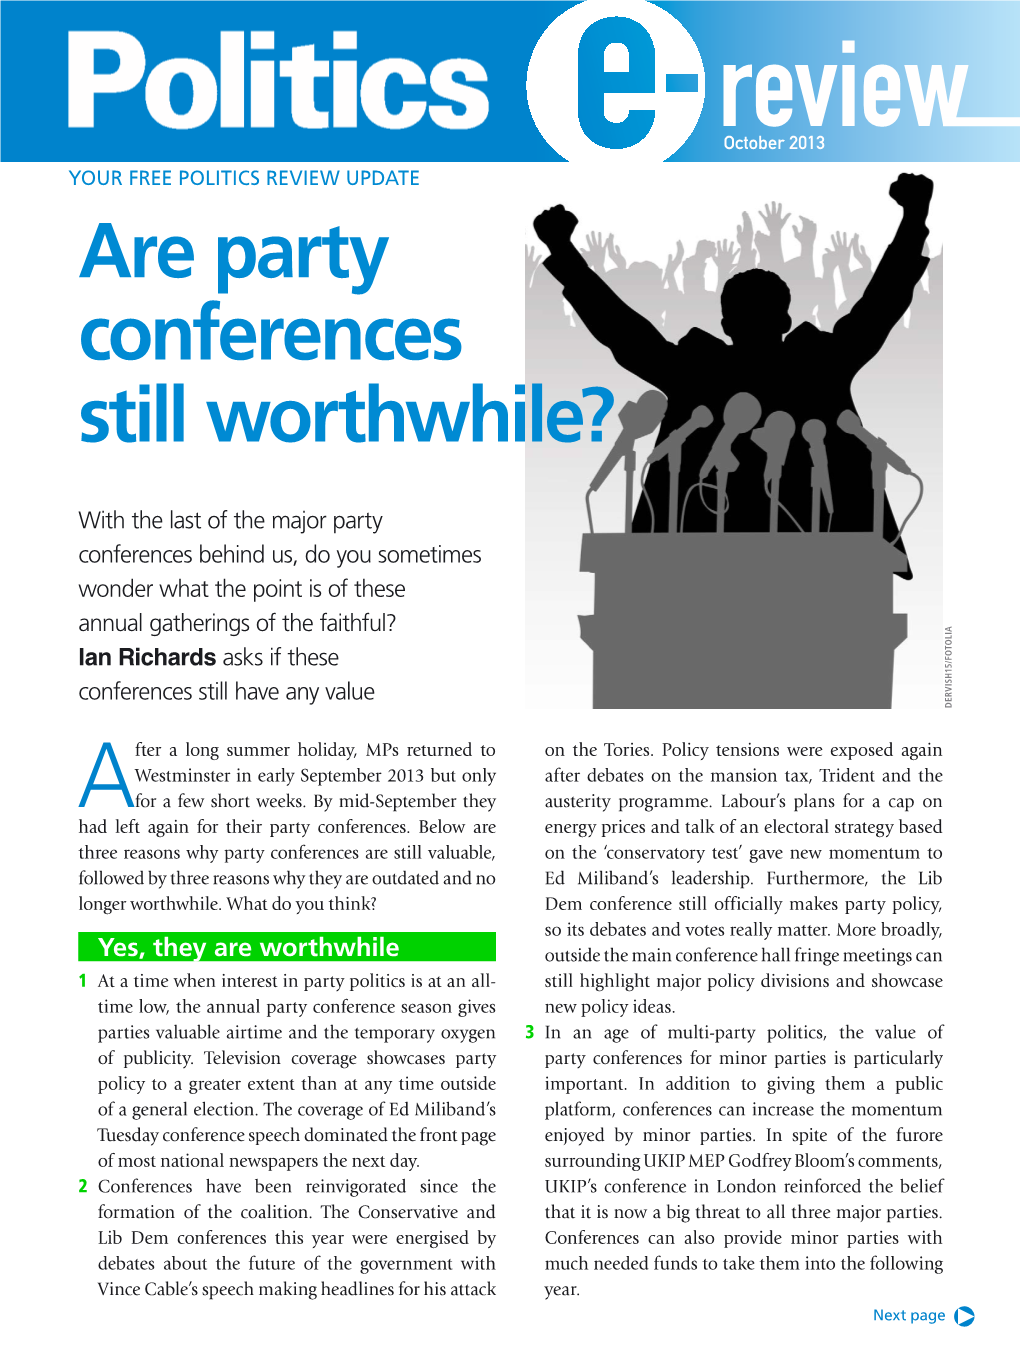 Are Party Conferences Still Worthwhile?